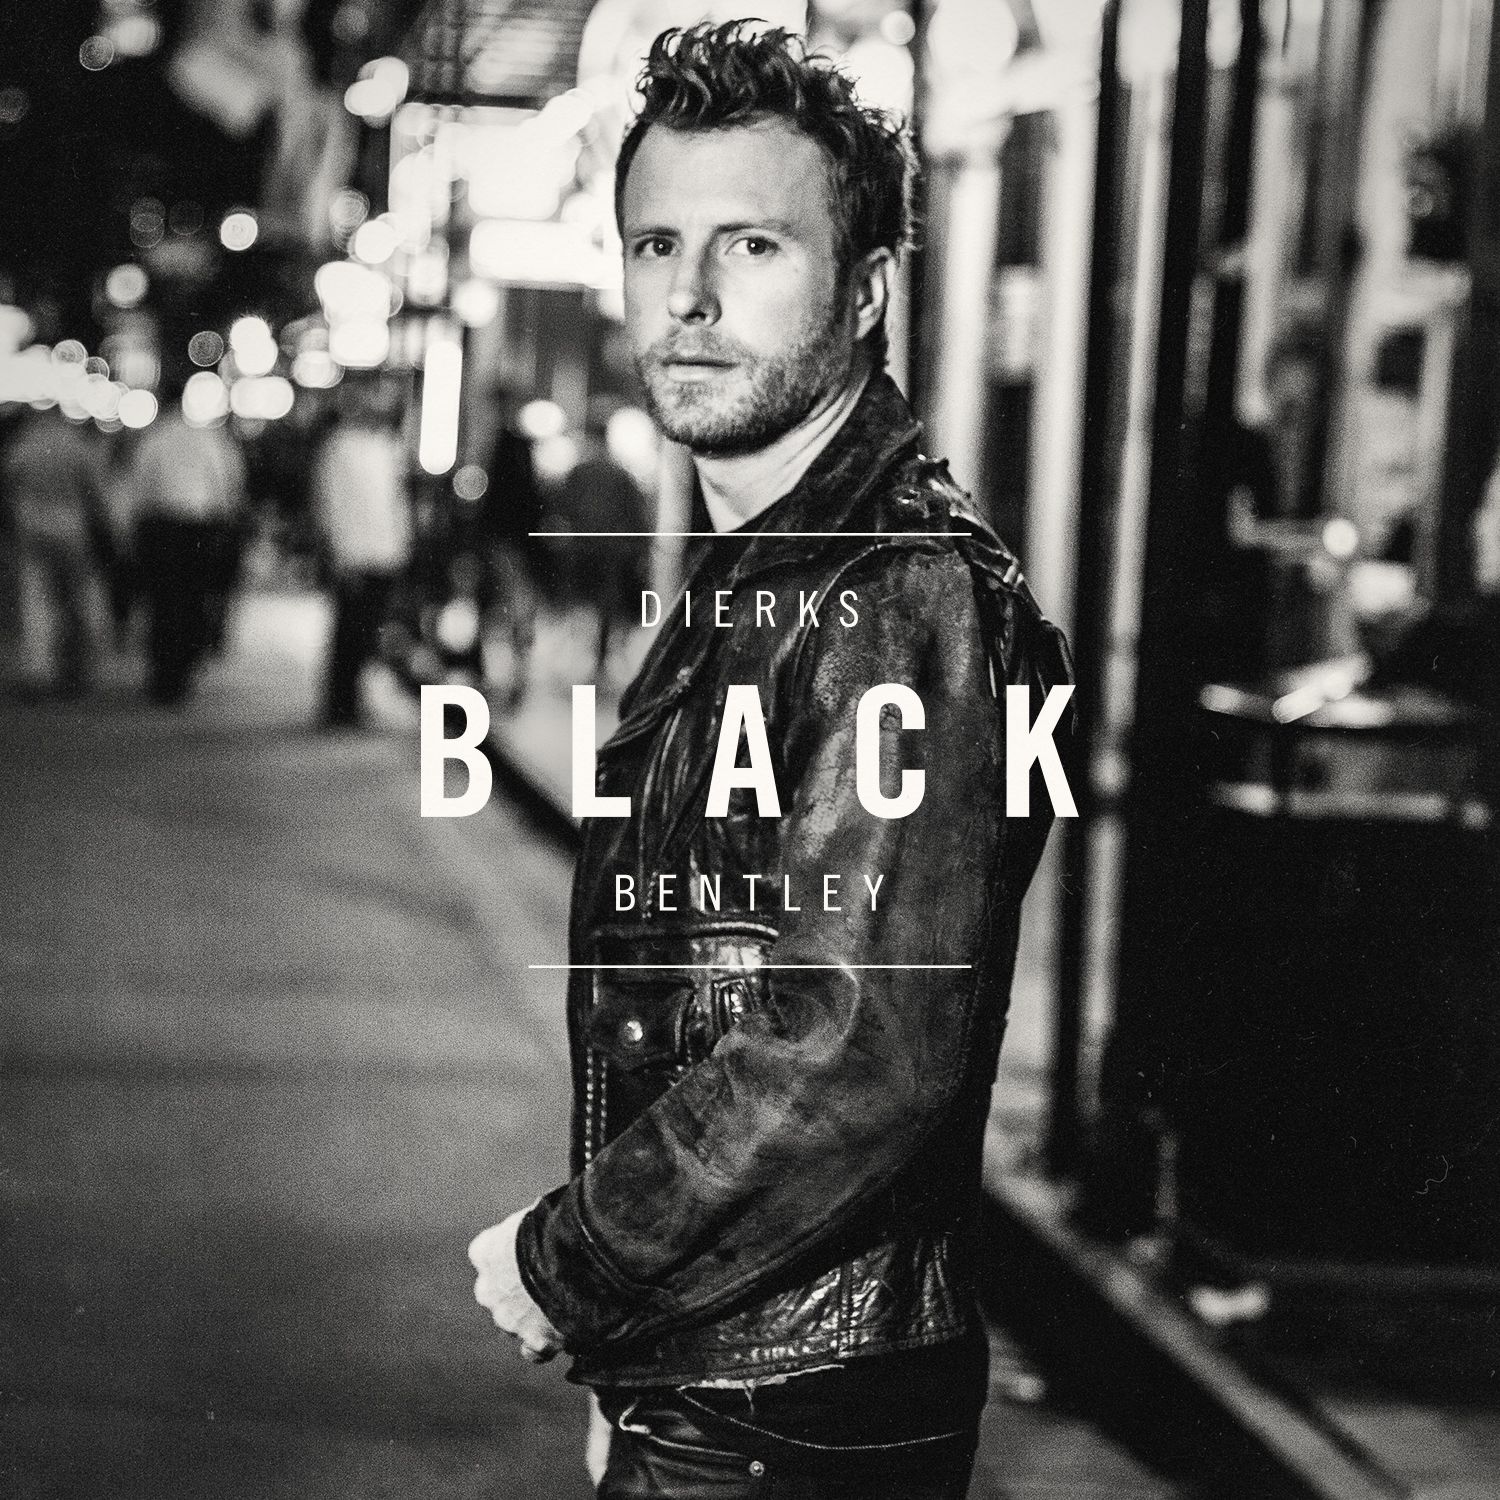 DIERKS BENTLEY’S “ALBUM OF THE YEAR” NOMINATED BLACK SHINES WITH GOLD CERTIFICATION